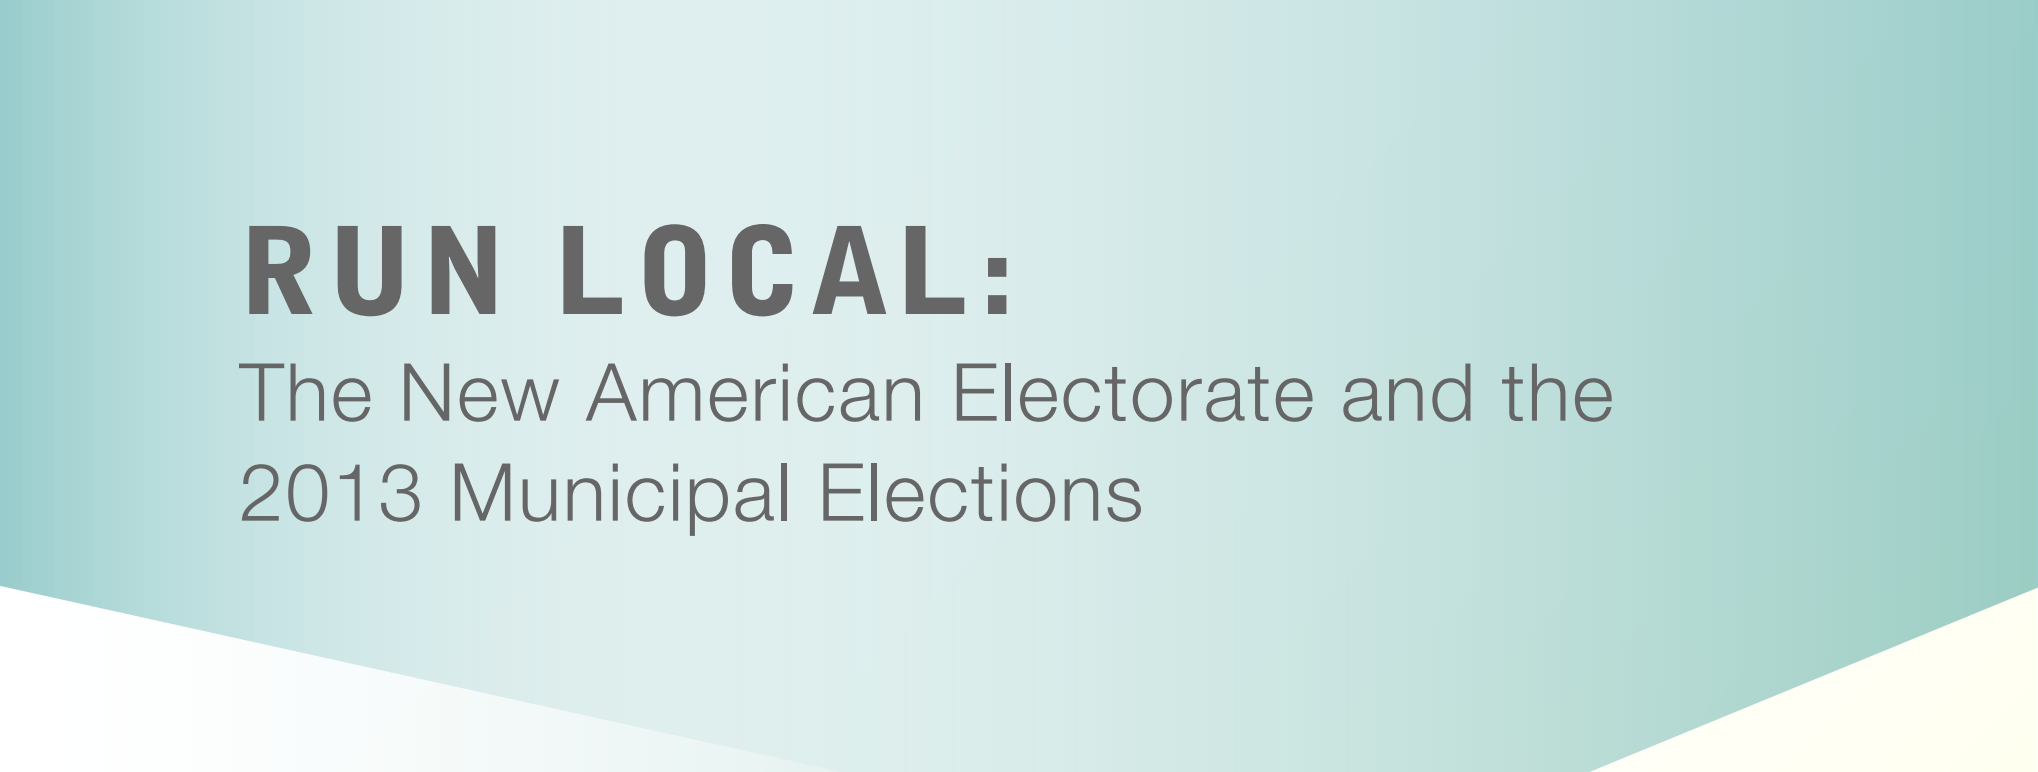 banner Run Local: The New American Electorate and the 2013 Municipal Elections